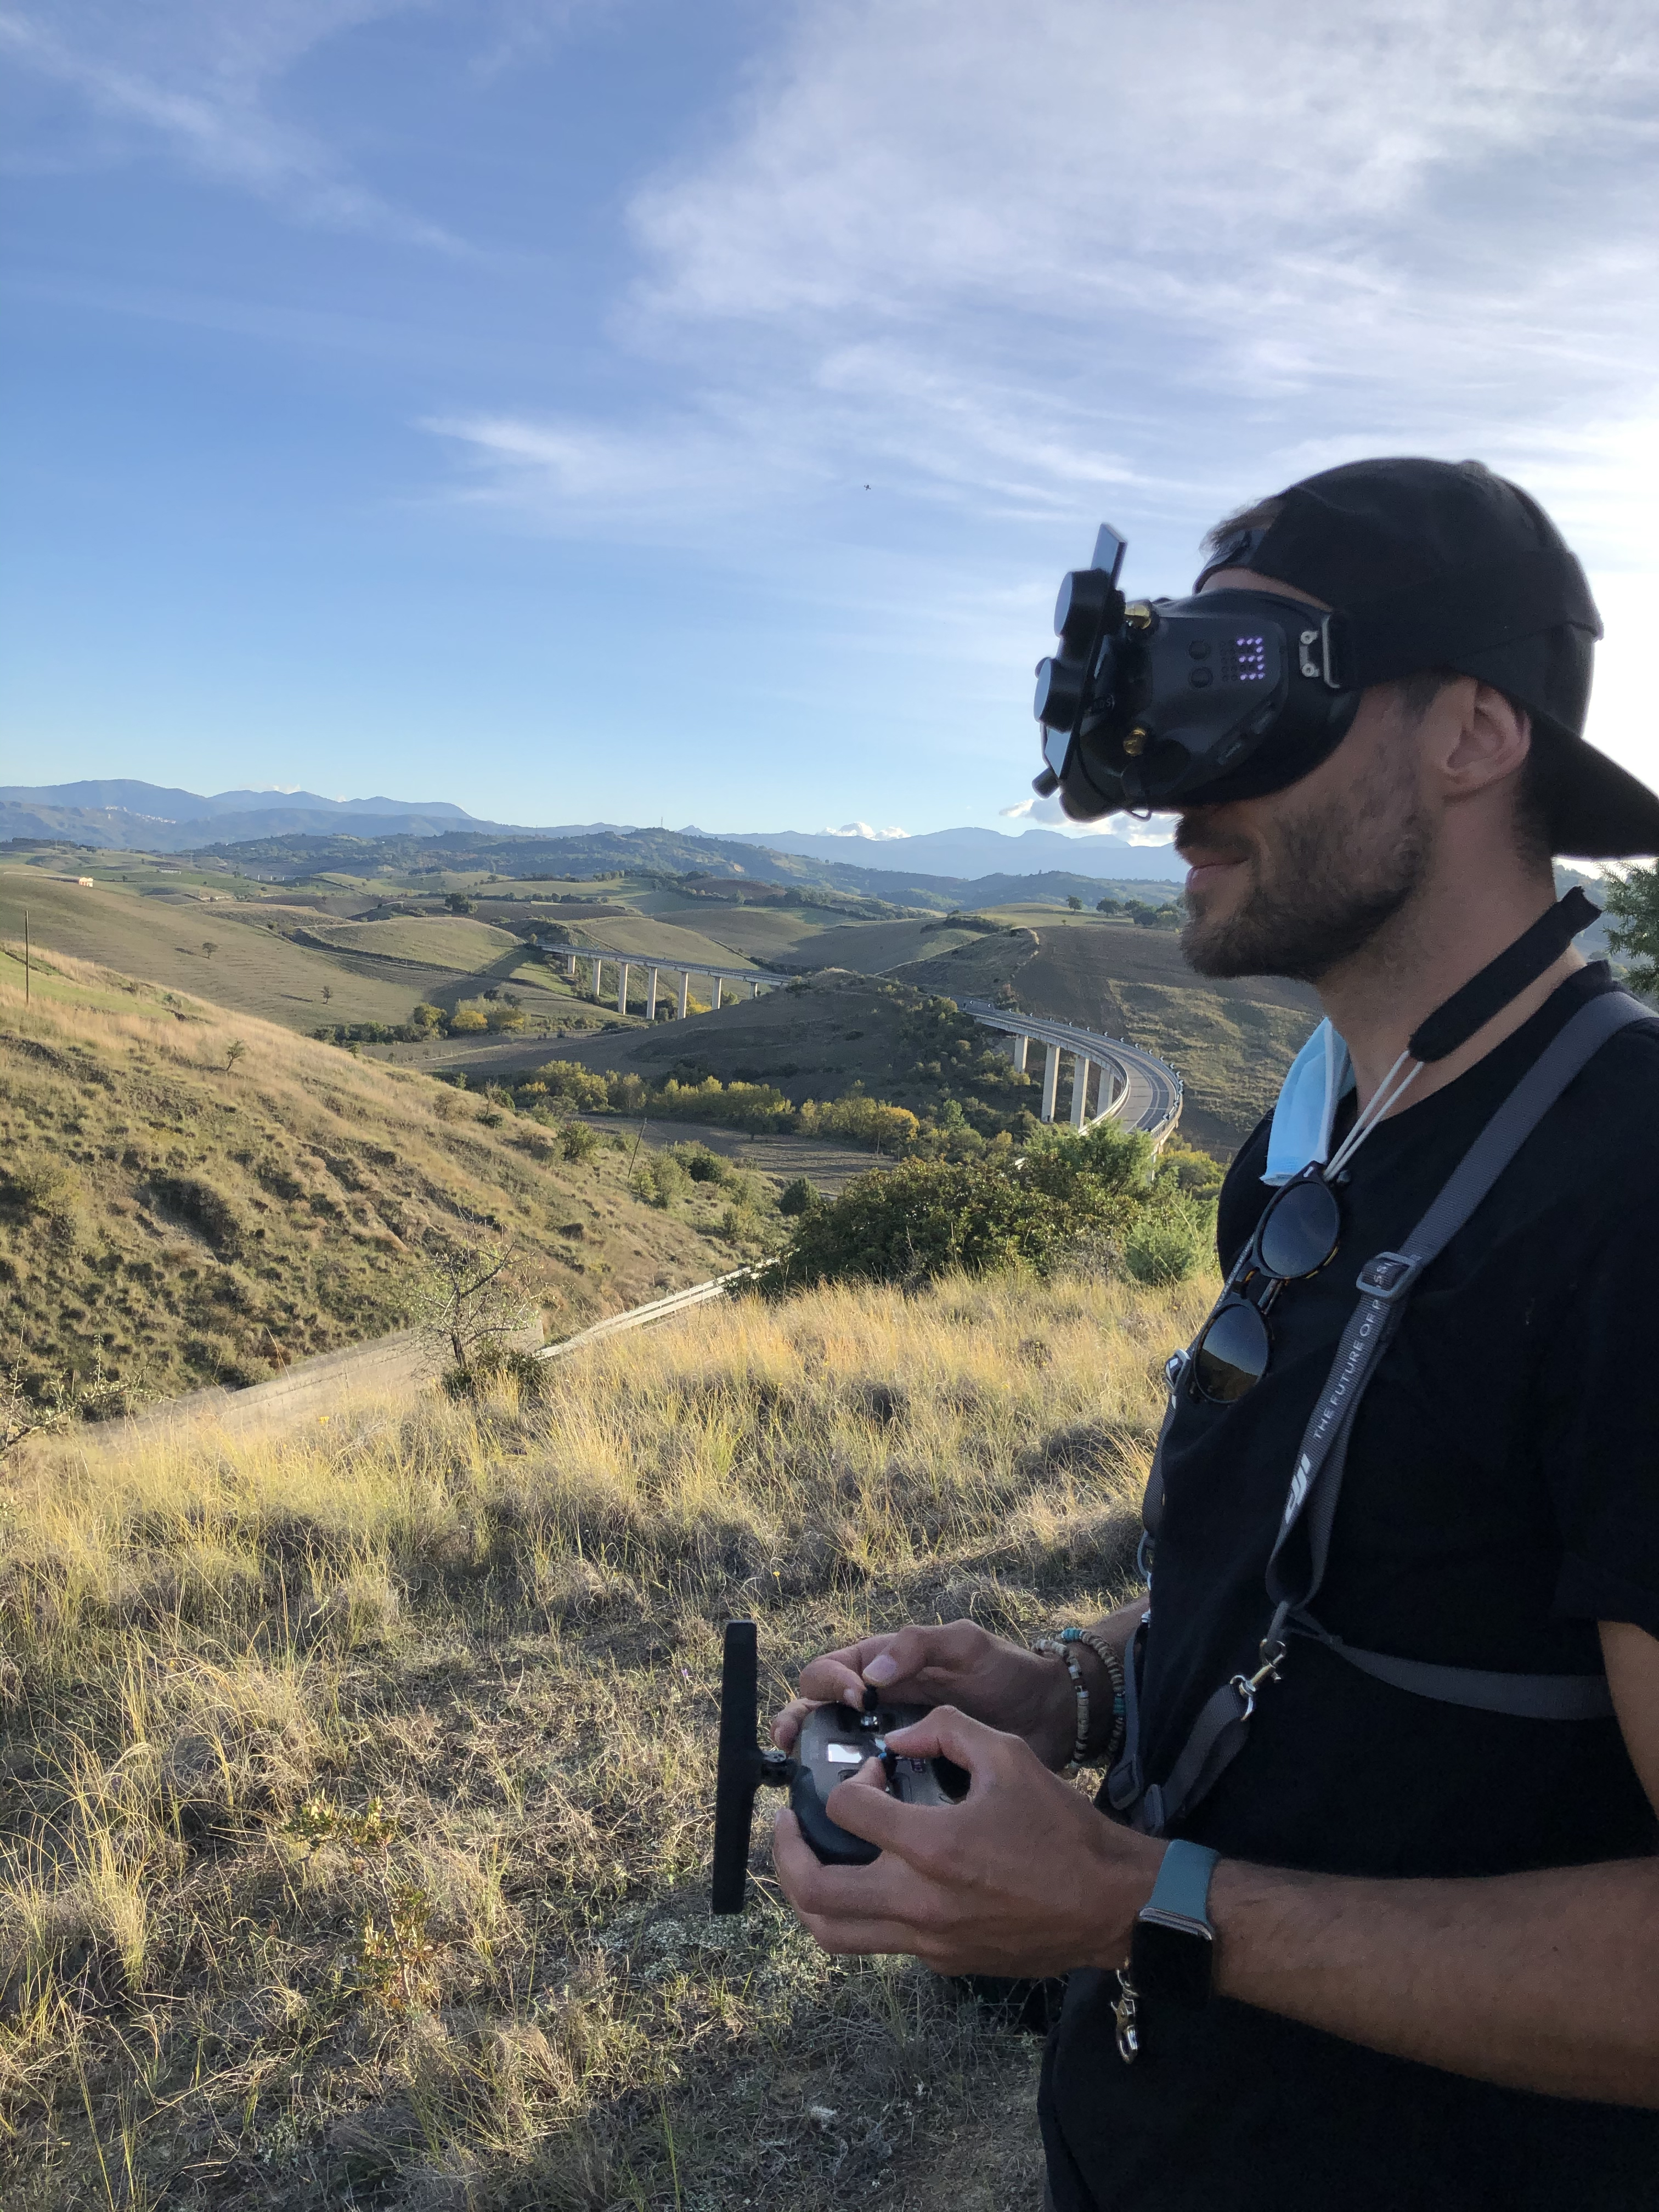 Man in VR goggles with road and hills in background